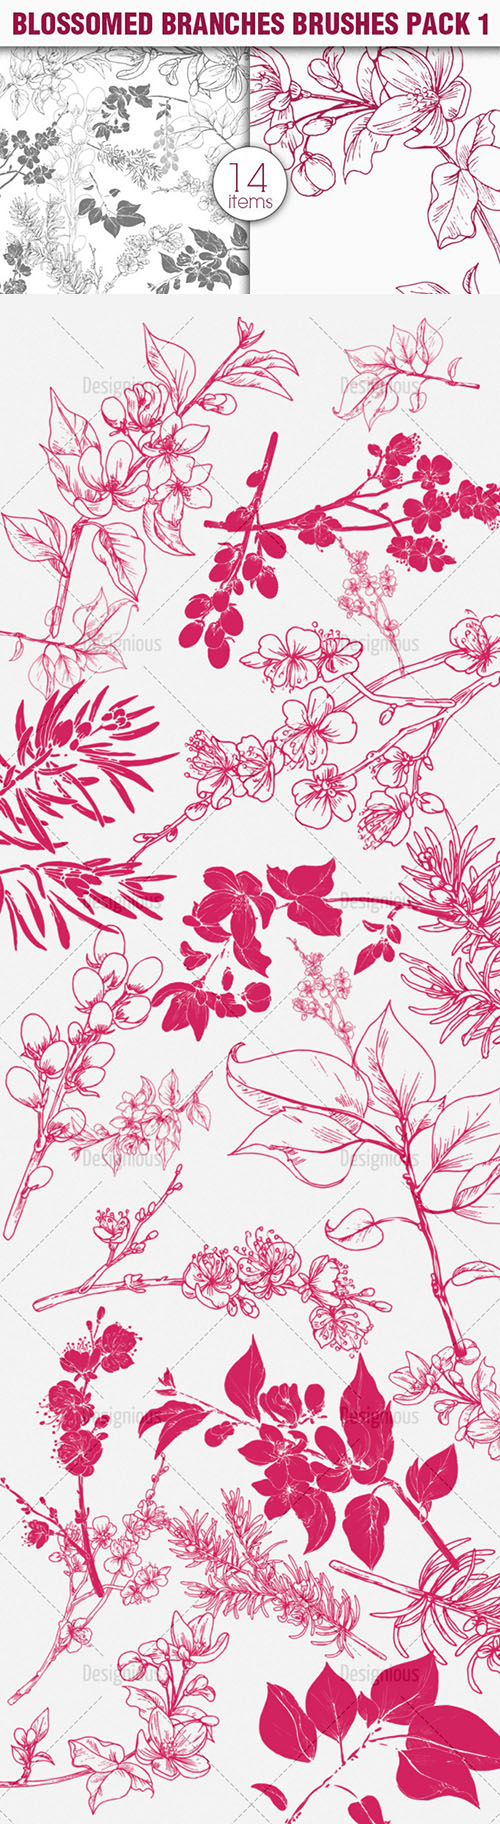 Blossomed Branches Photoshop Brushes Pack 1